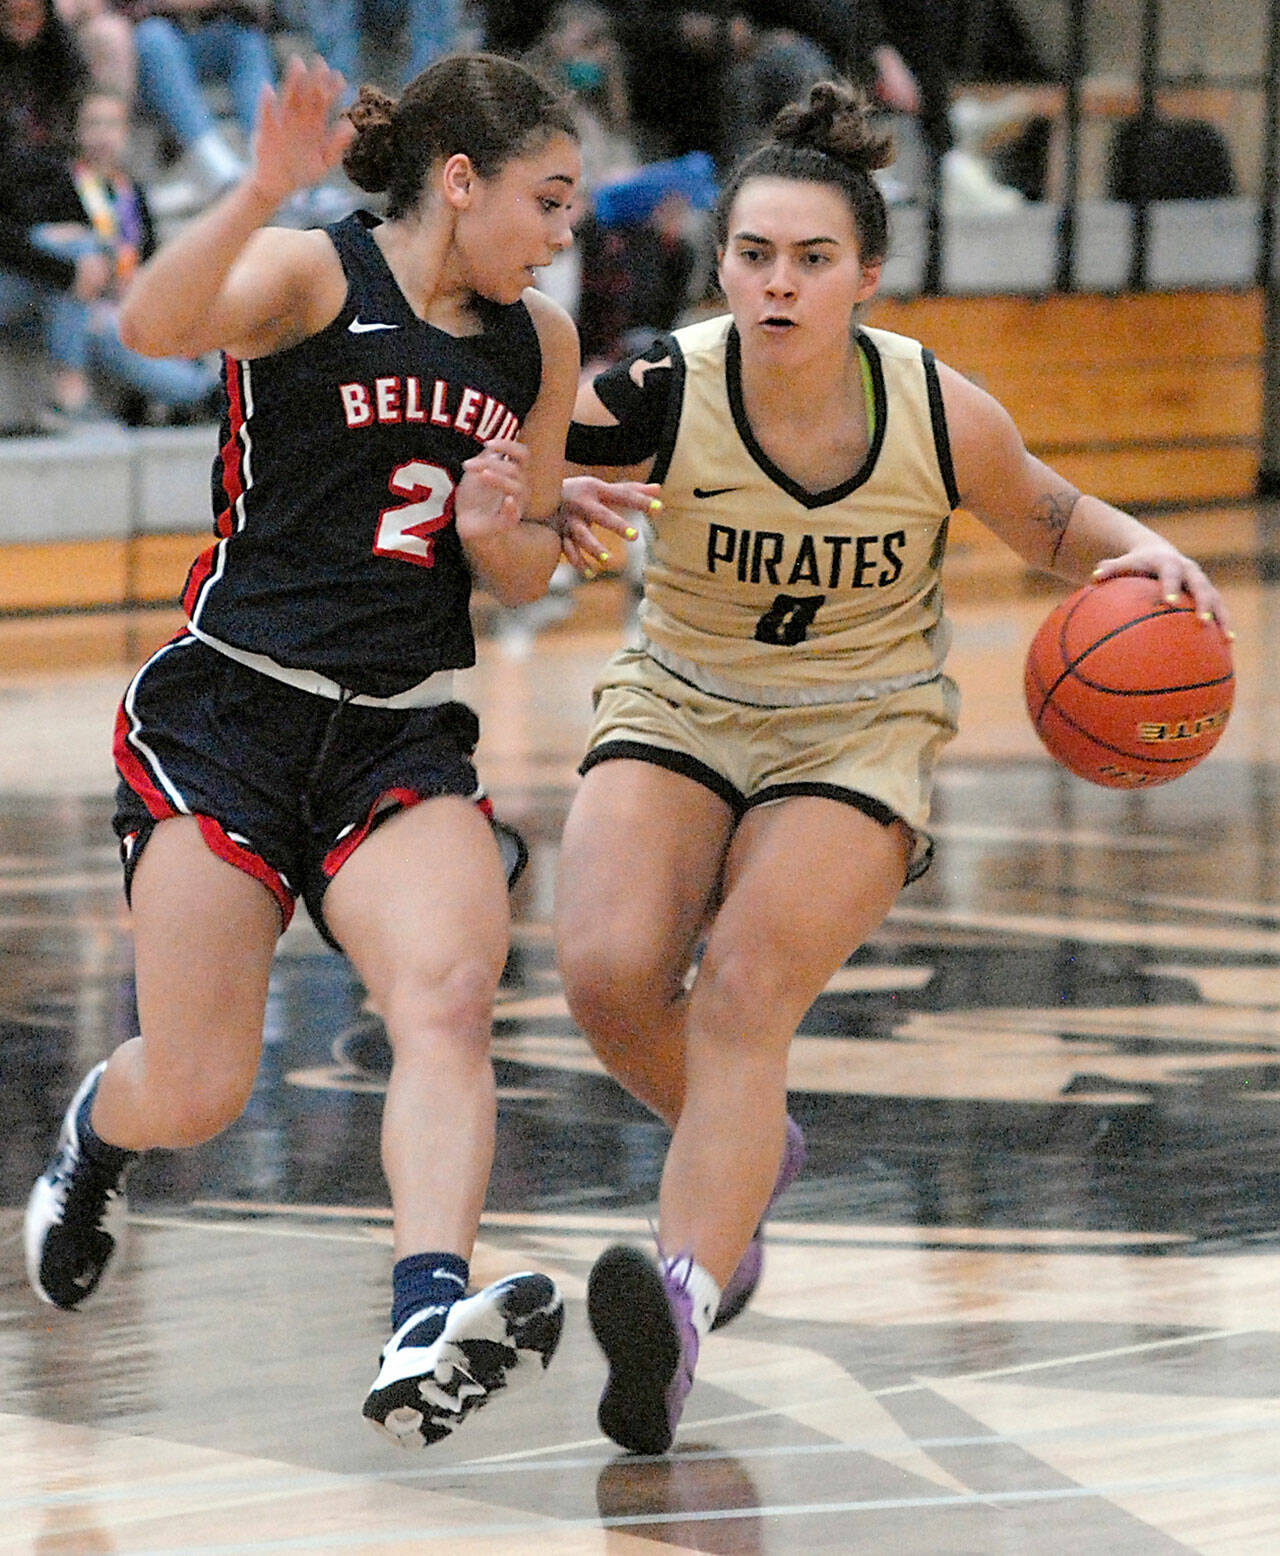 Peninsula’s Keeli-Jade Smith, right, drives past Bellevue’s Alashae Bell on Saturday in Port Angeles. Photo by Keith Thorpe/Olympic Peninsula News Group